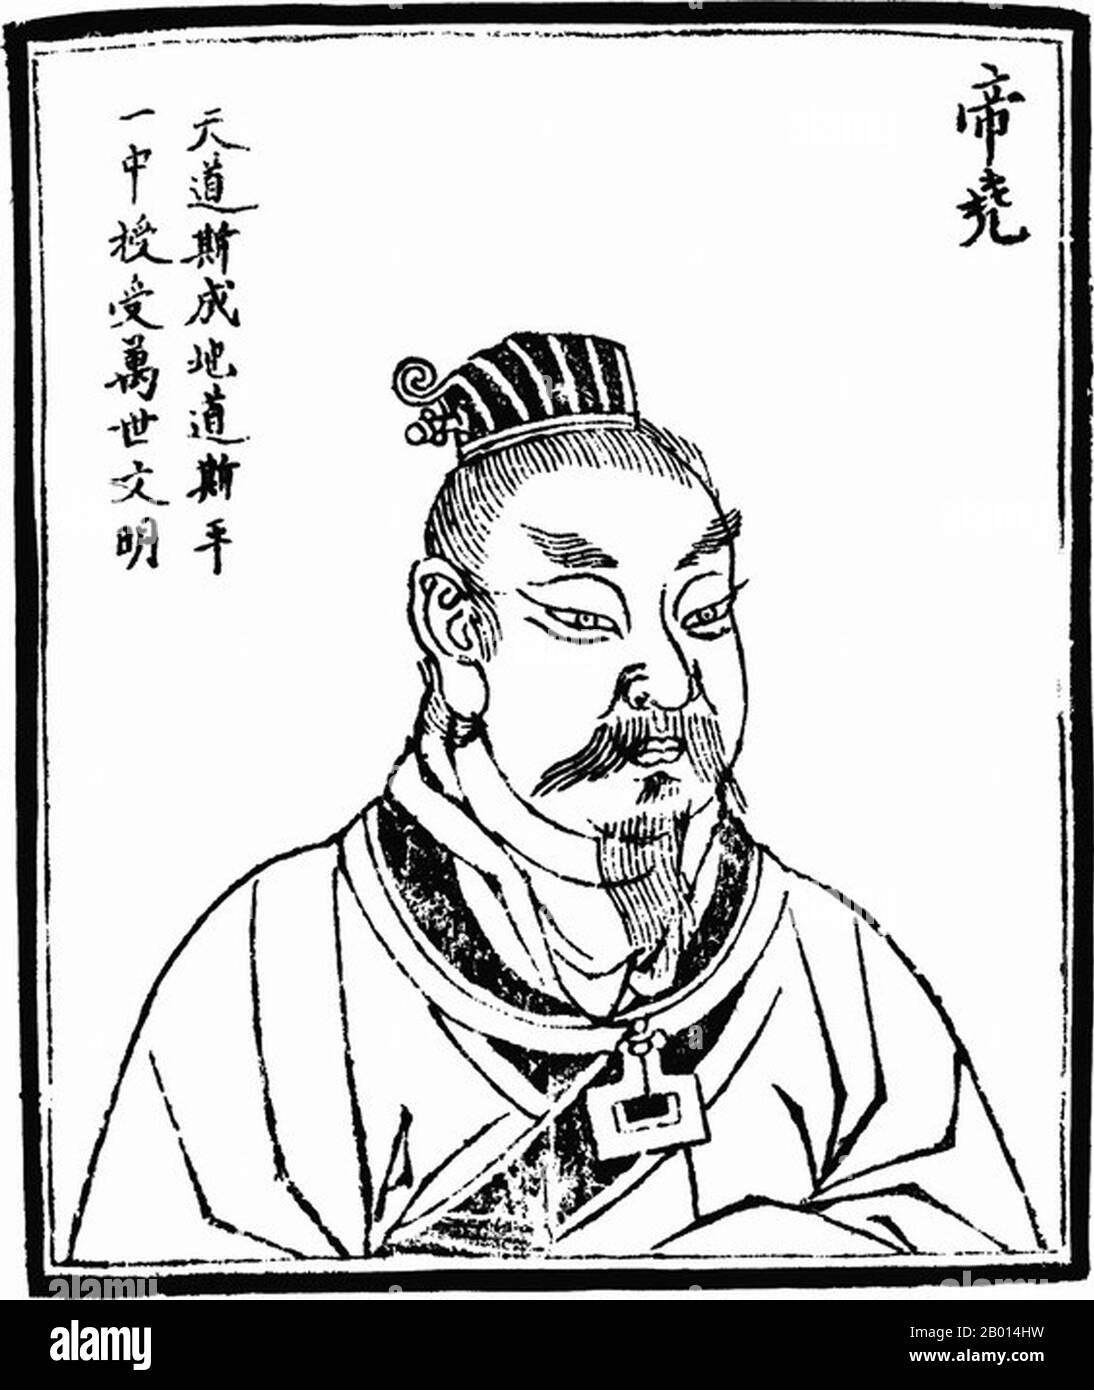 China: Emperor Yao (c. 2356-2255 BCE), fourth of the legendary 'Five Emperors'. Illustration, c. 1498.  Yao, also known as Tang Yao, was a legendary Chinese ruler, one of the Three Sovereigns and Five Emperors. According to the legends, he became emperor at the age of 20, ruling for 73 years before abdicating to Shun the Great, to whom he had given his two daughters in marriage. The Great Flood began during his reign. He died aged 119.  The Three Sovereigns and Five Emperors are a blend of mythological rulers and cultural heroes from ancient China. Stock Photo